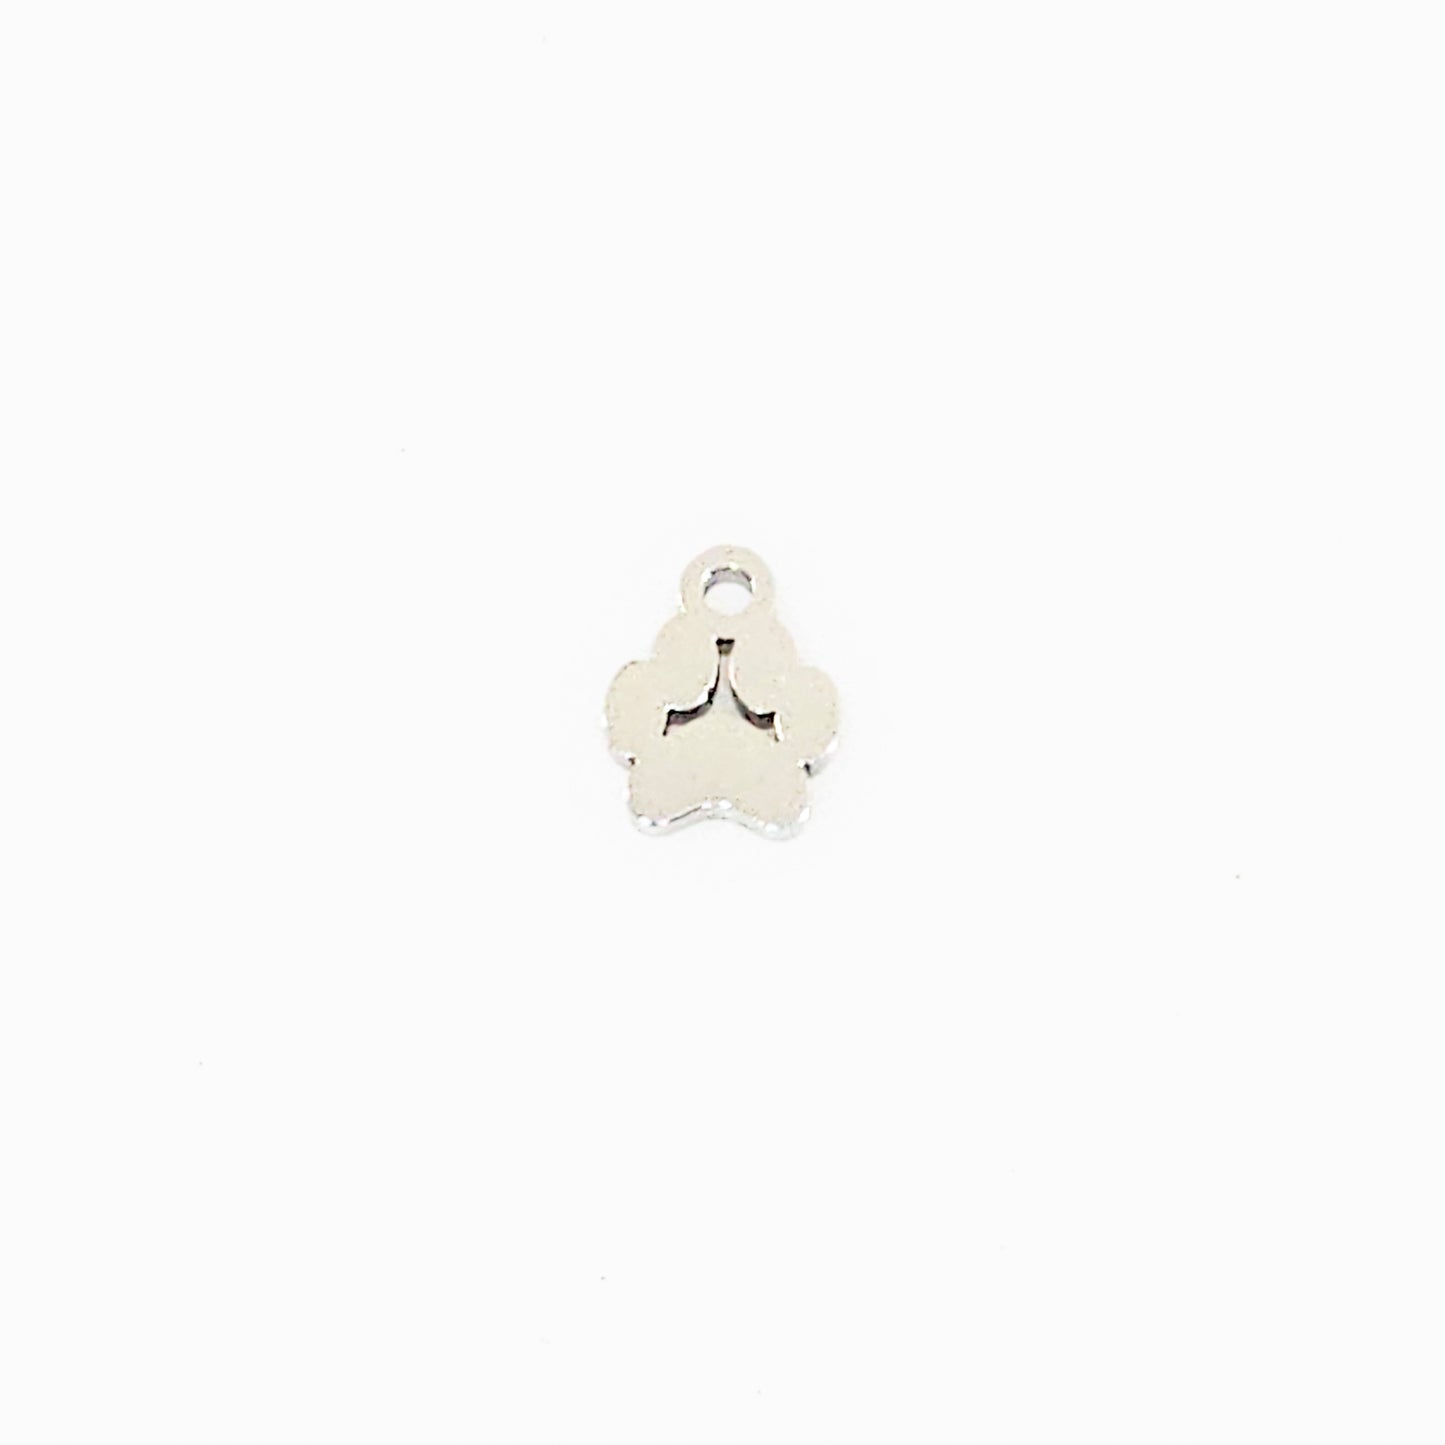 Tiny Paw Charm - Stainless Steel - 7.5mm x 8mm